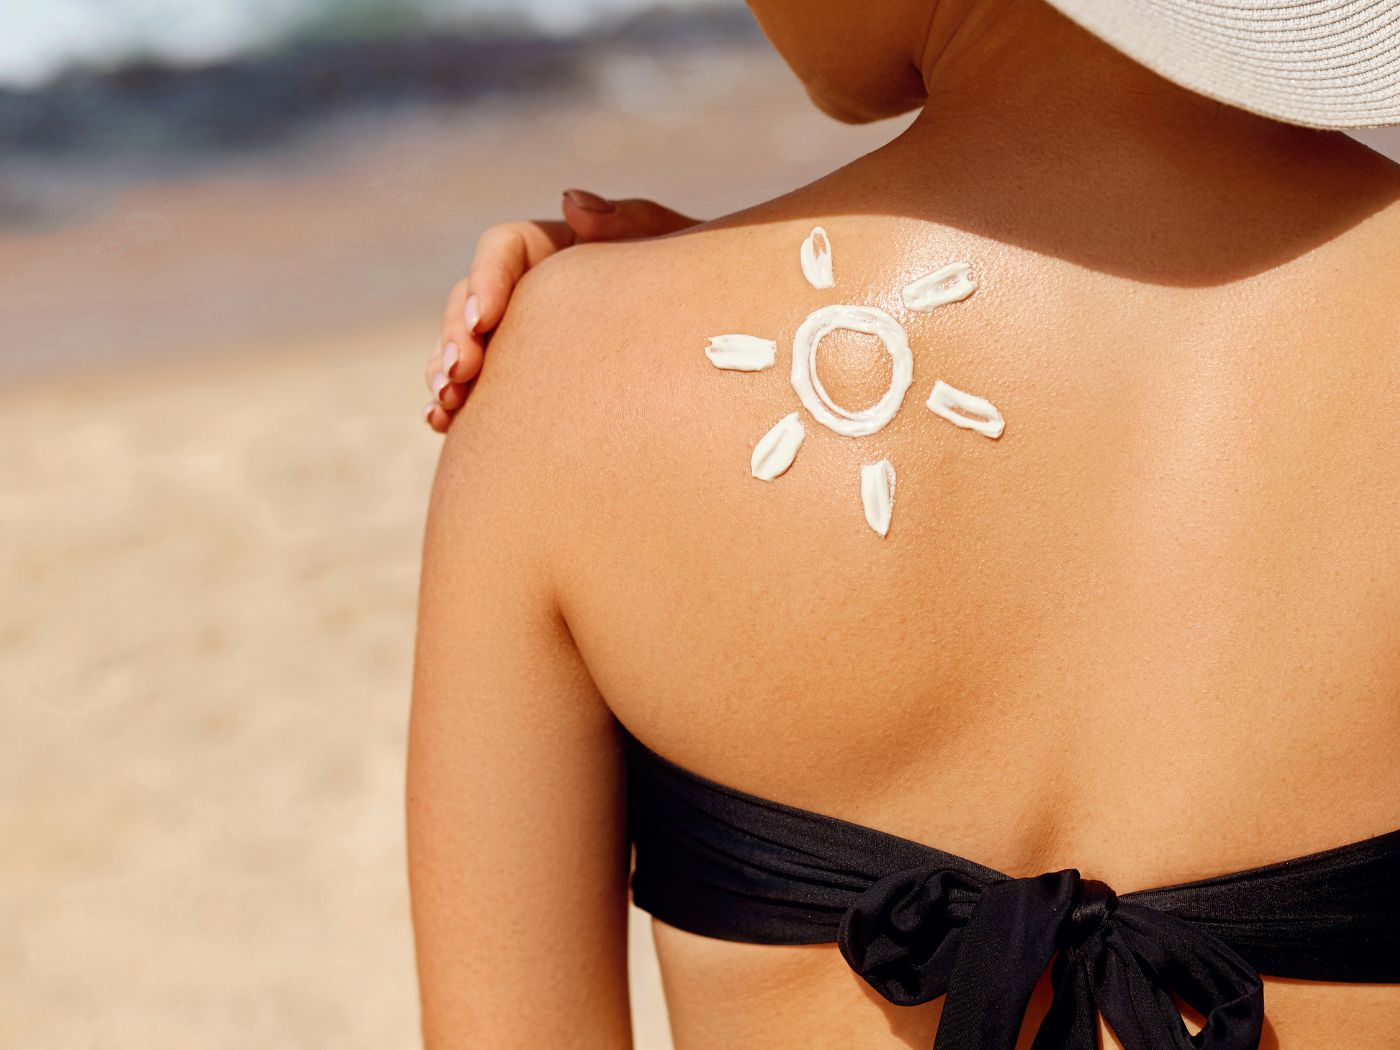 How To Properly Use Sunscreens?